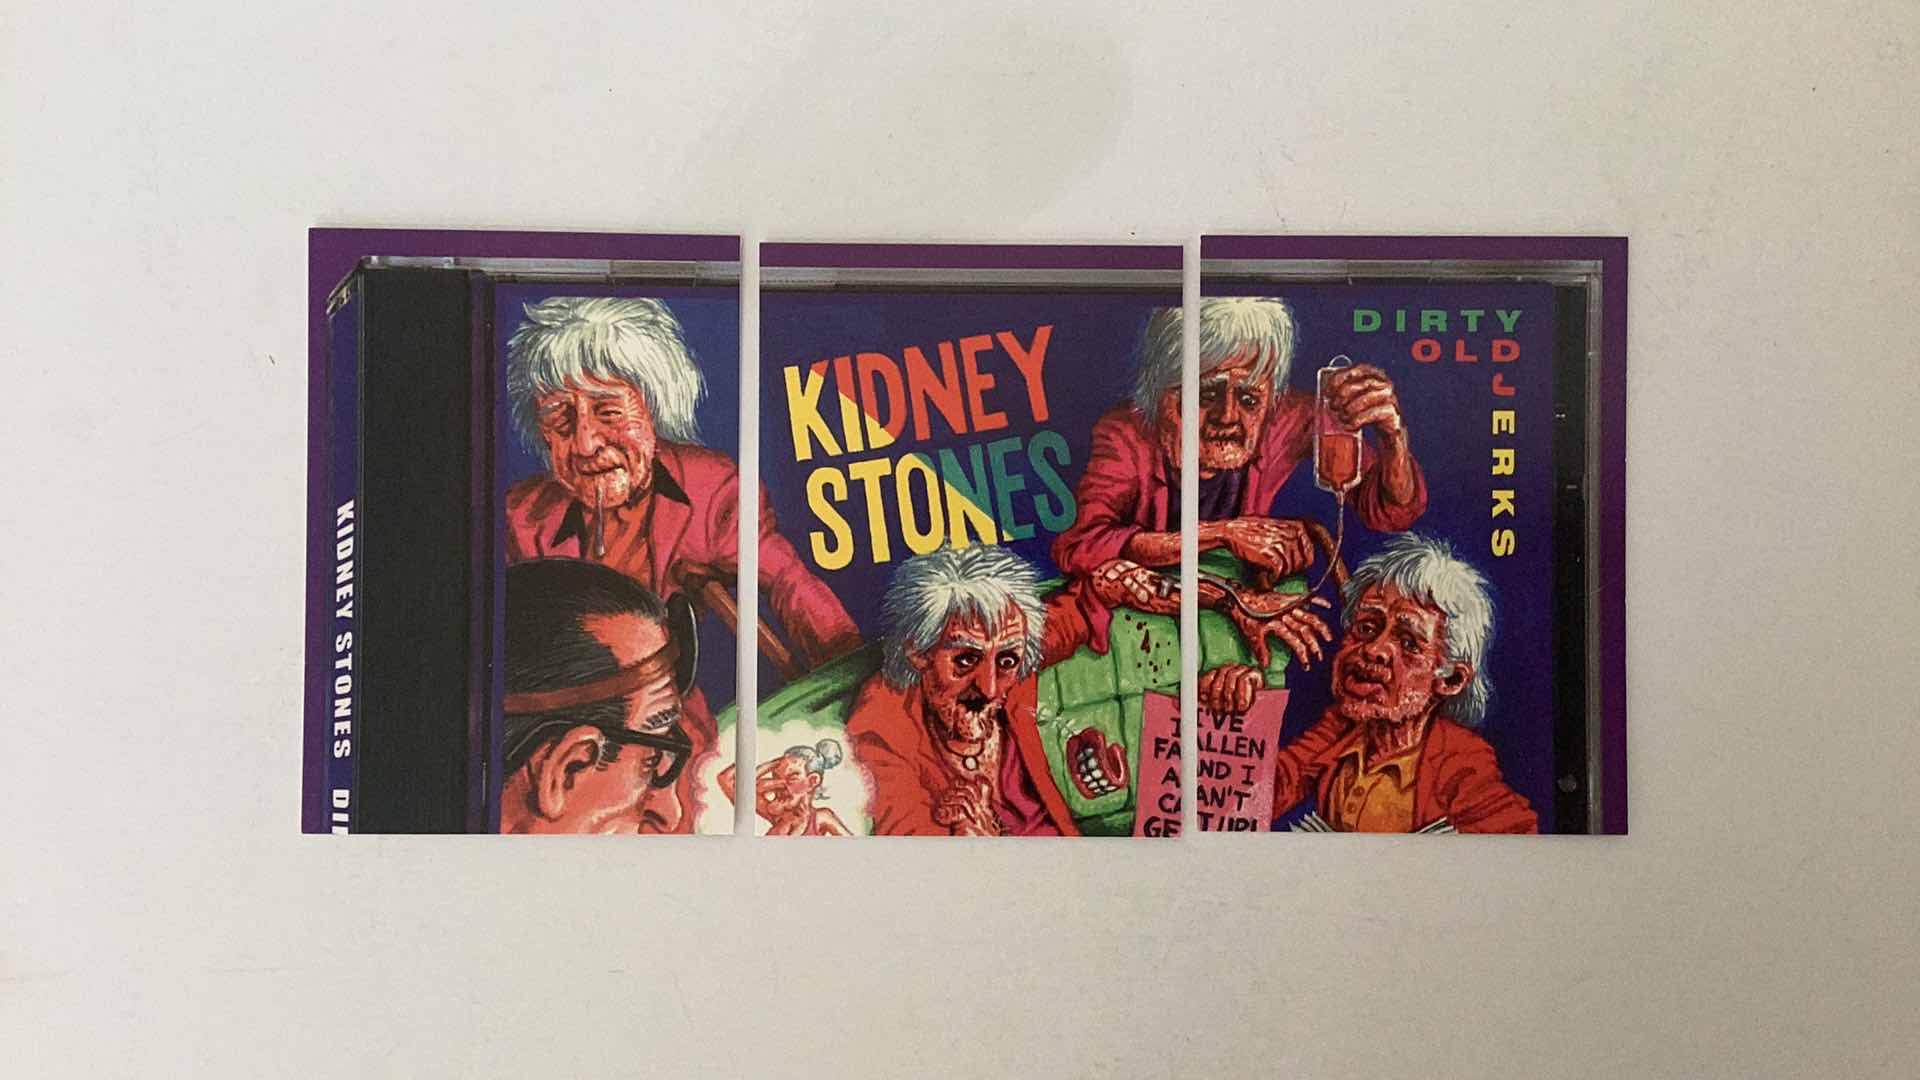 Photo 1 of SILLY CDS 2001 KIDNEY STONES DIRTY OLD JERKS PUZZLE